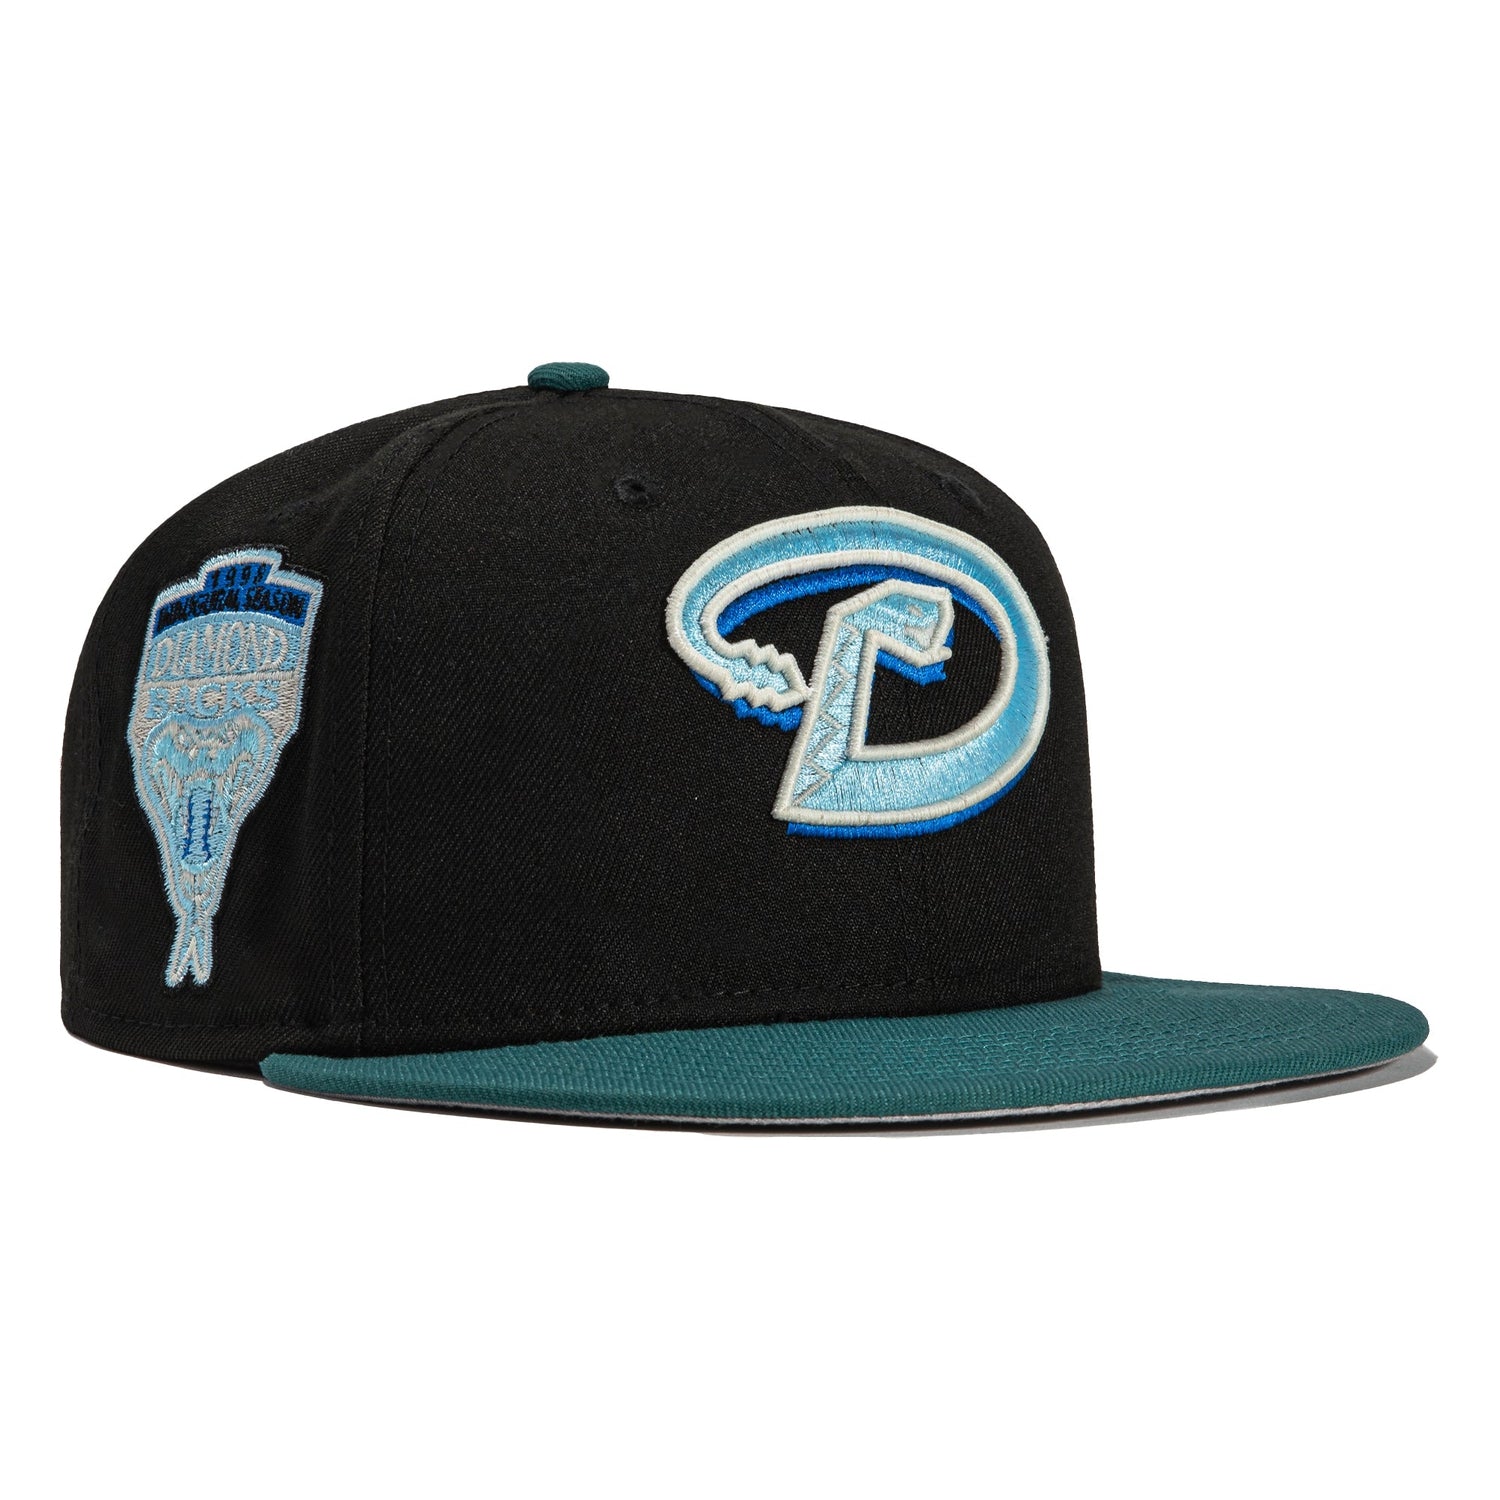 Navy Blue Oakland Athletics Icy Blue Bottom 50th Anniversary Side Patch New  Era 59Fifty Fitted